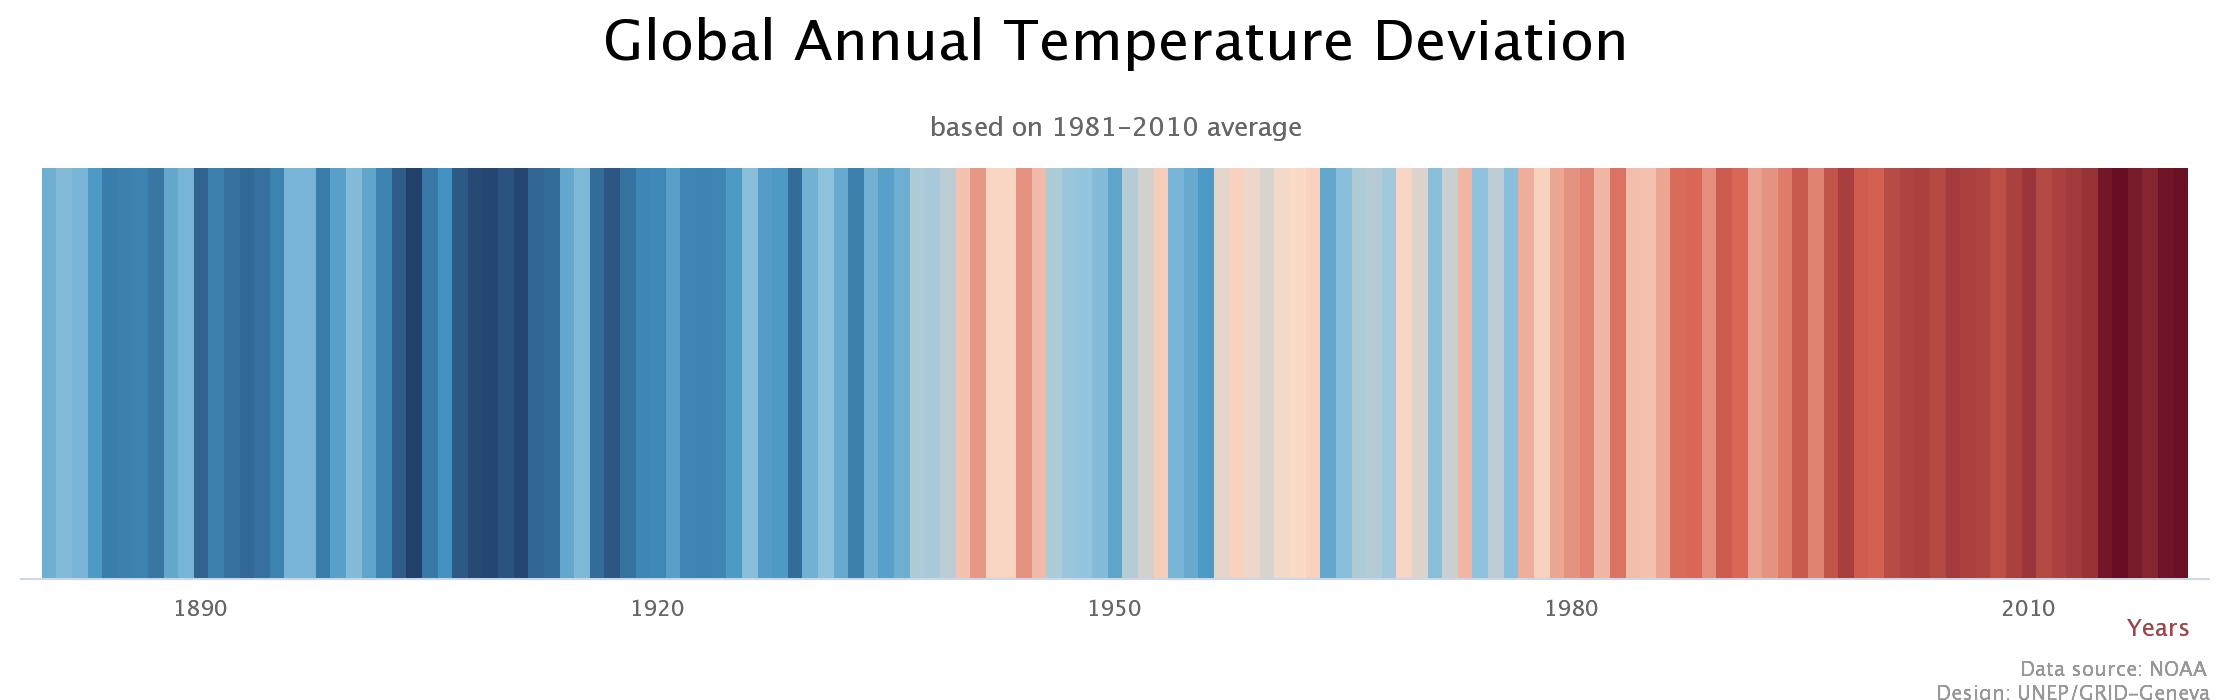 Graph showing the global annual temperature deviation